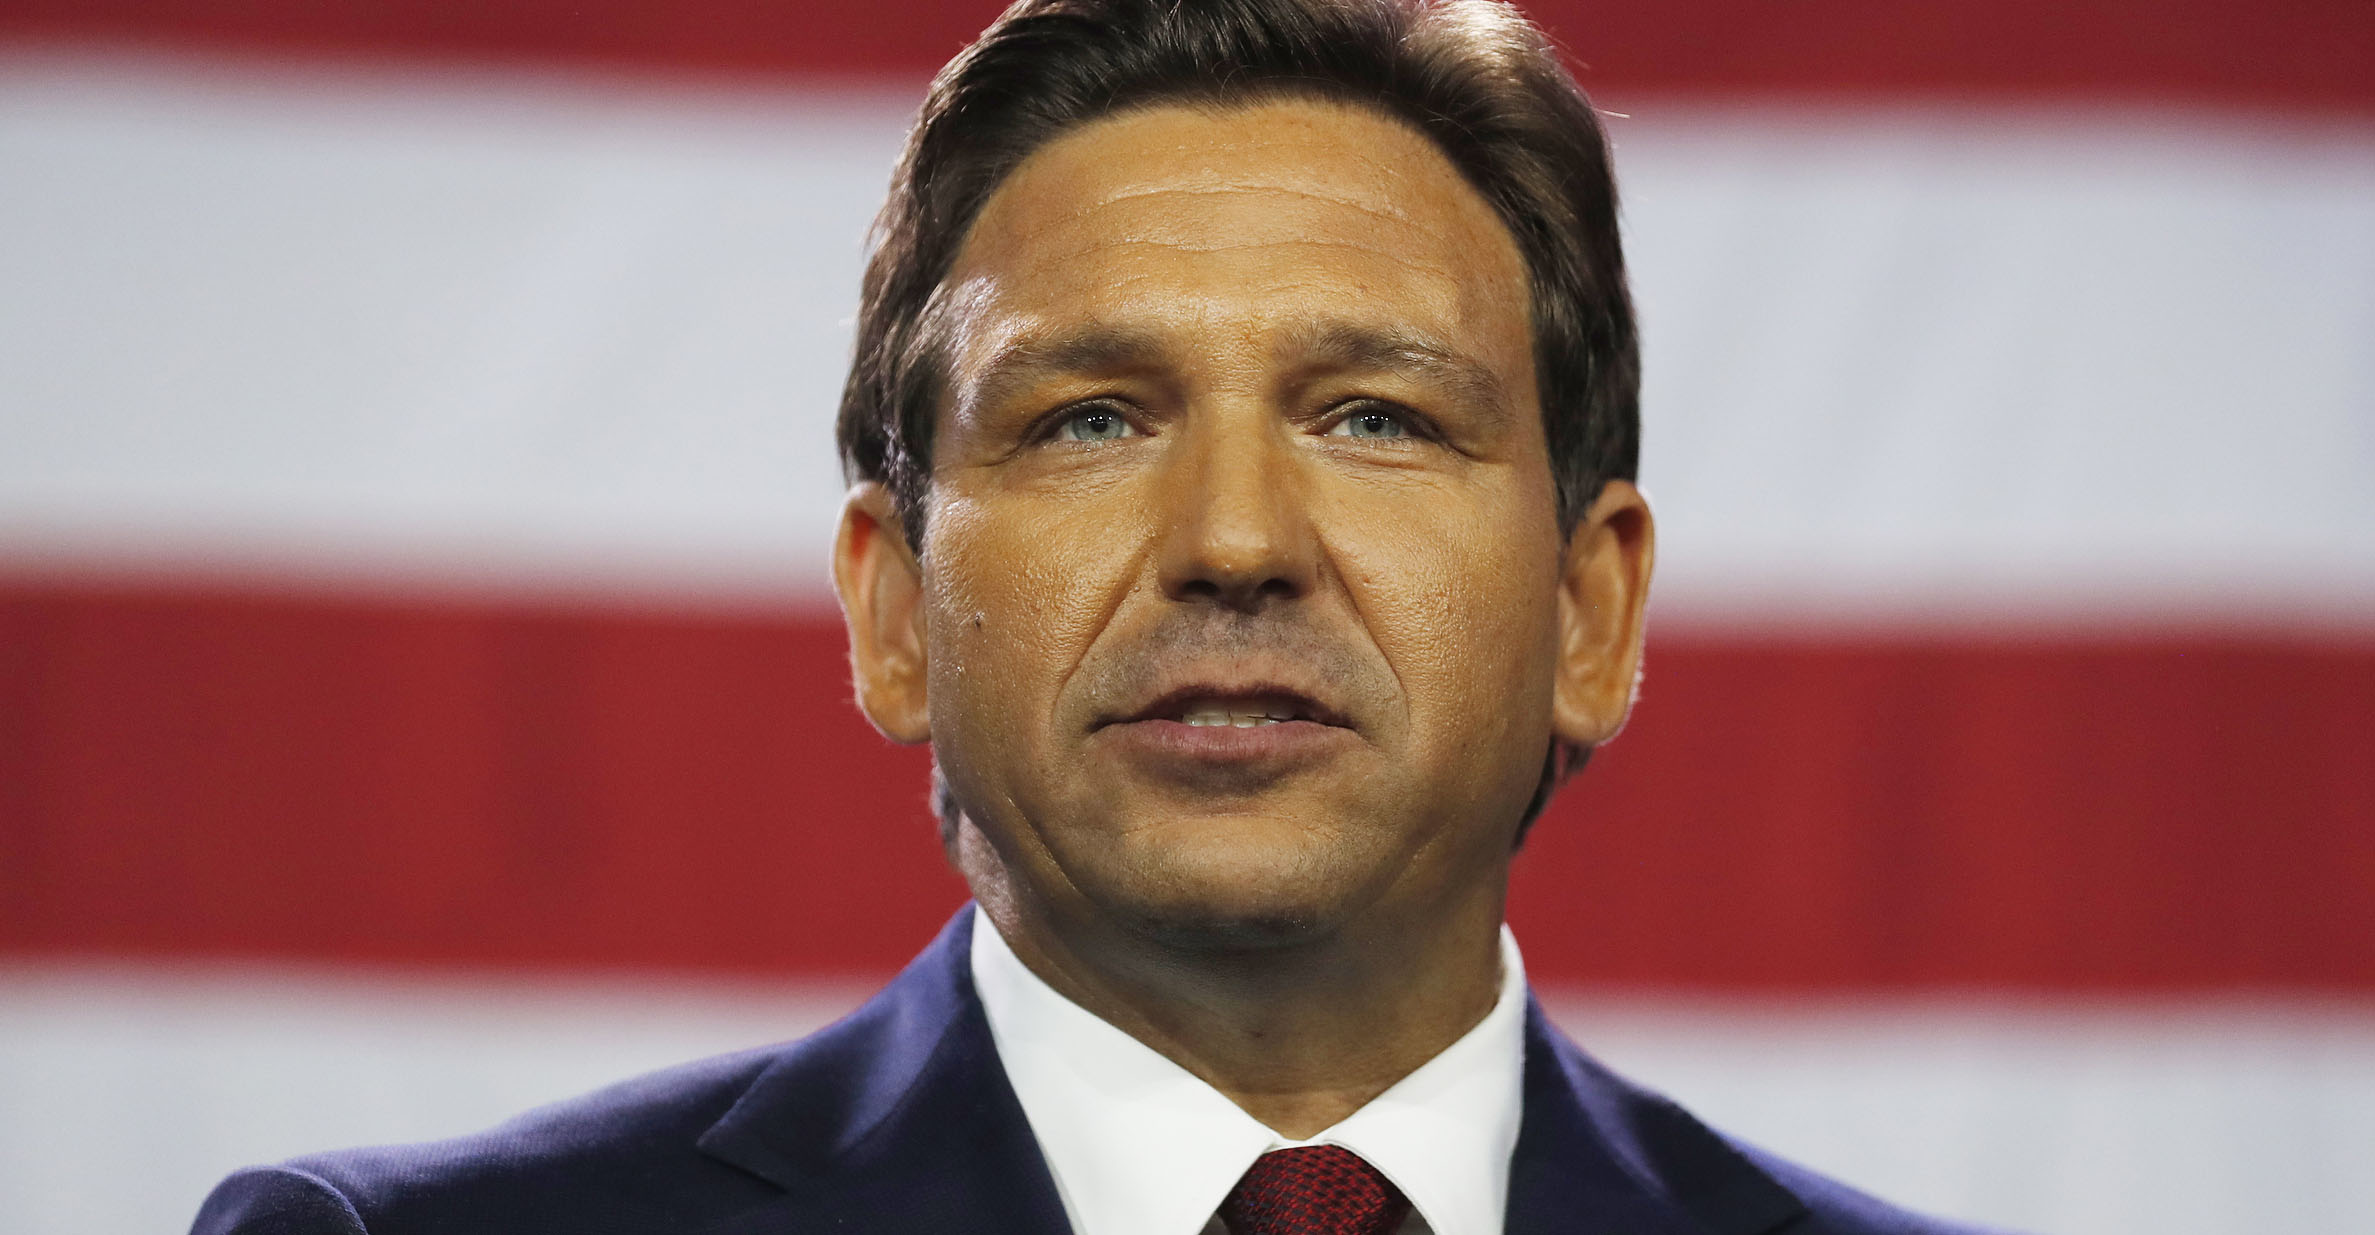 Ron DeSantis Responds to Trump Criticisms: ‘When You’re Getting Things Done, You Take Incoming Fire’